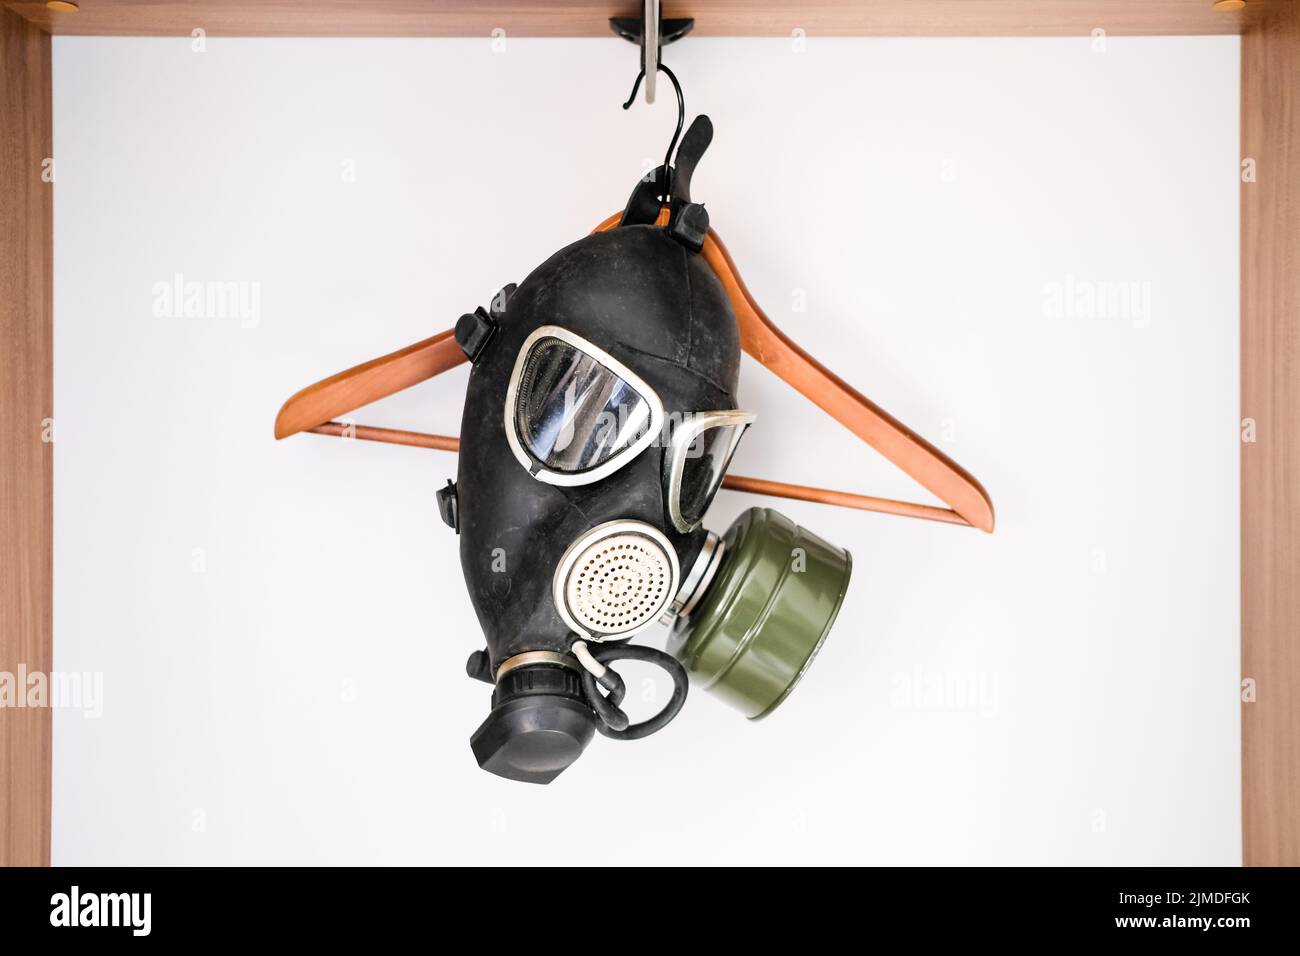 Coronavirus. A black gas mask hangs on the clothes hanger in an empty wardrobe. Stock Photo